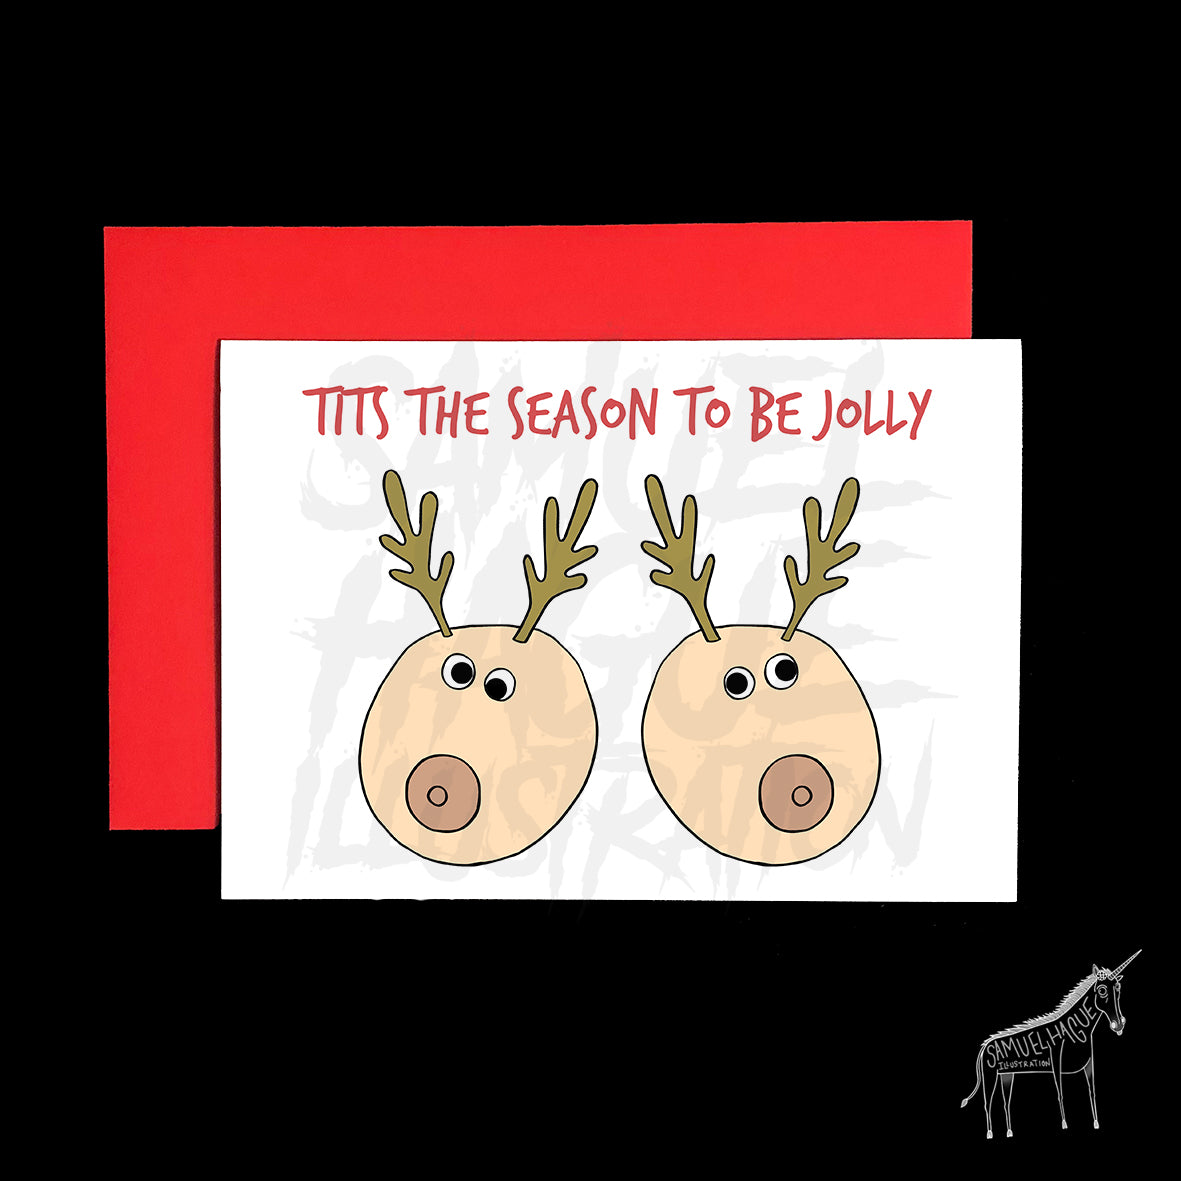 Tits the season' Classic Holiday Greeting Cards – Untepid